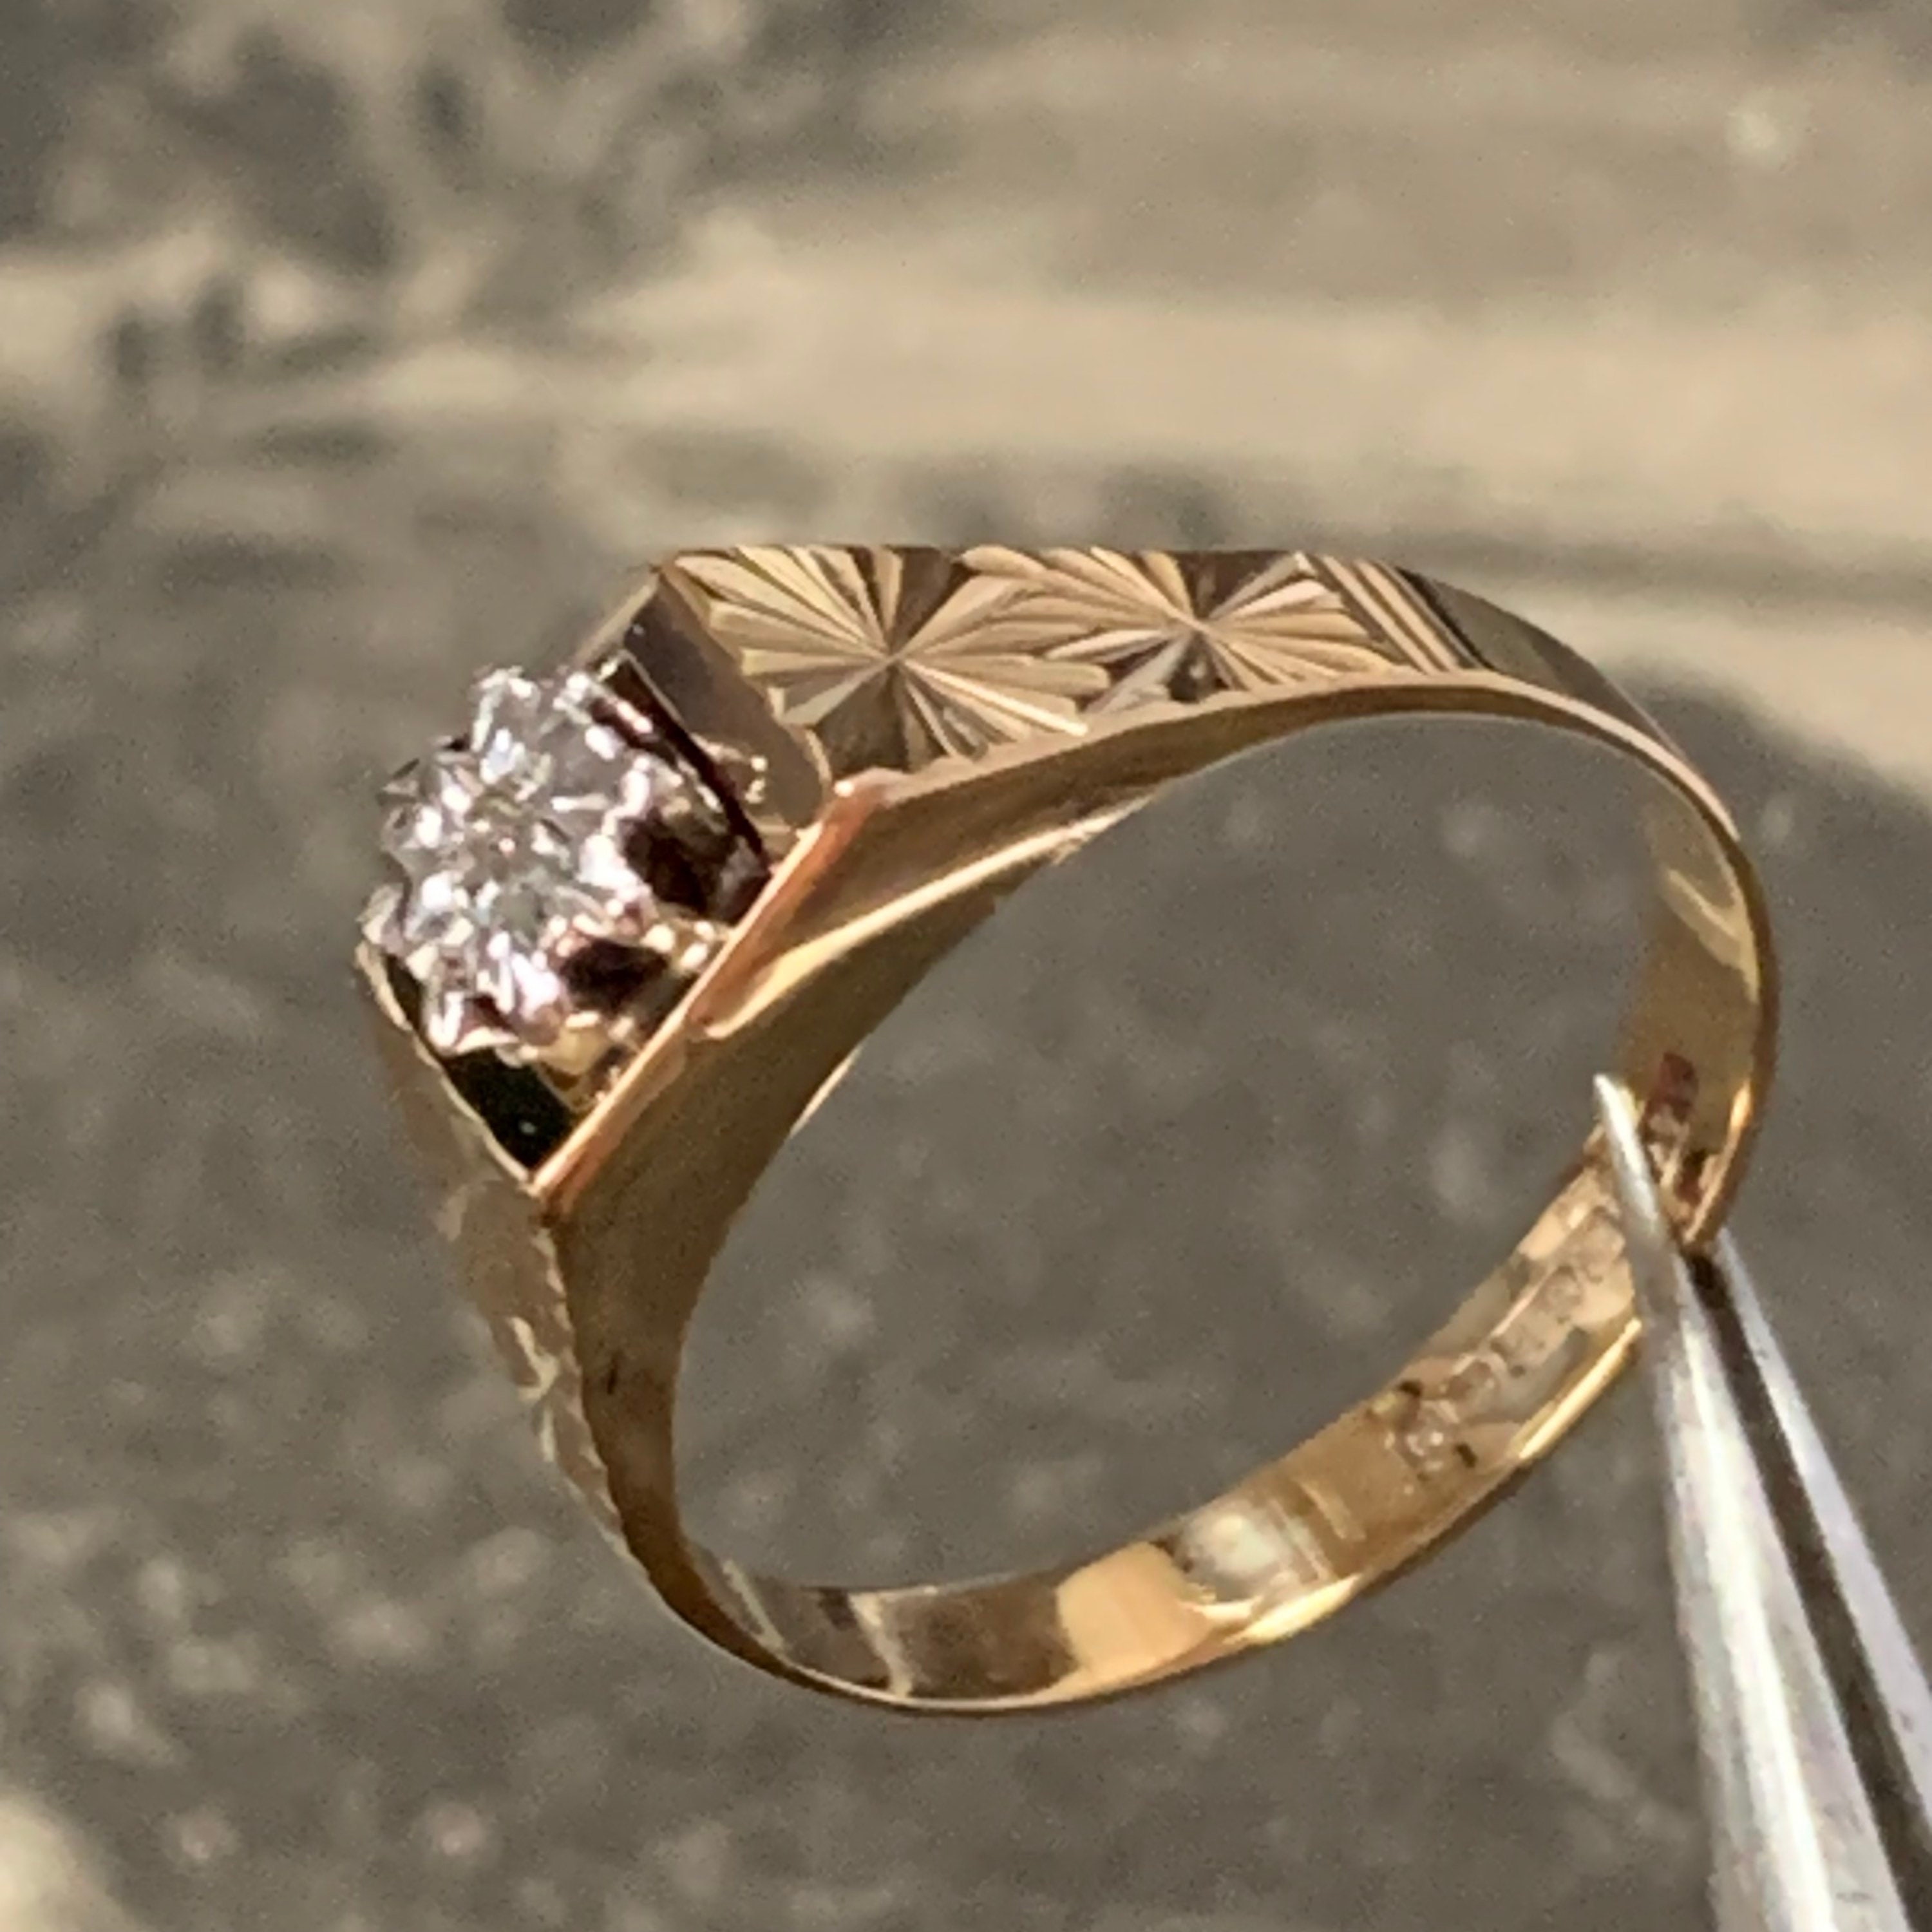 Vintage 1970S Diamond Engagement Ring With Engraved Shoulders in A Size M. This Has The Benefits Of Having Full UK Hallmarks